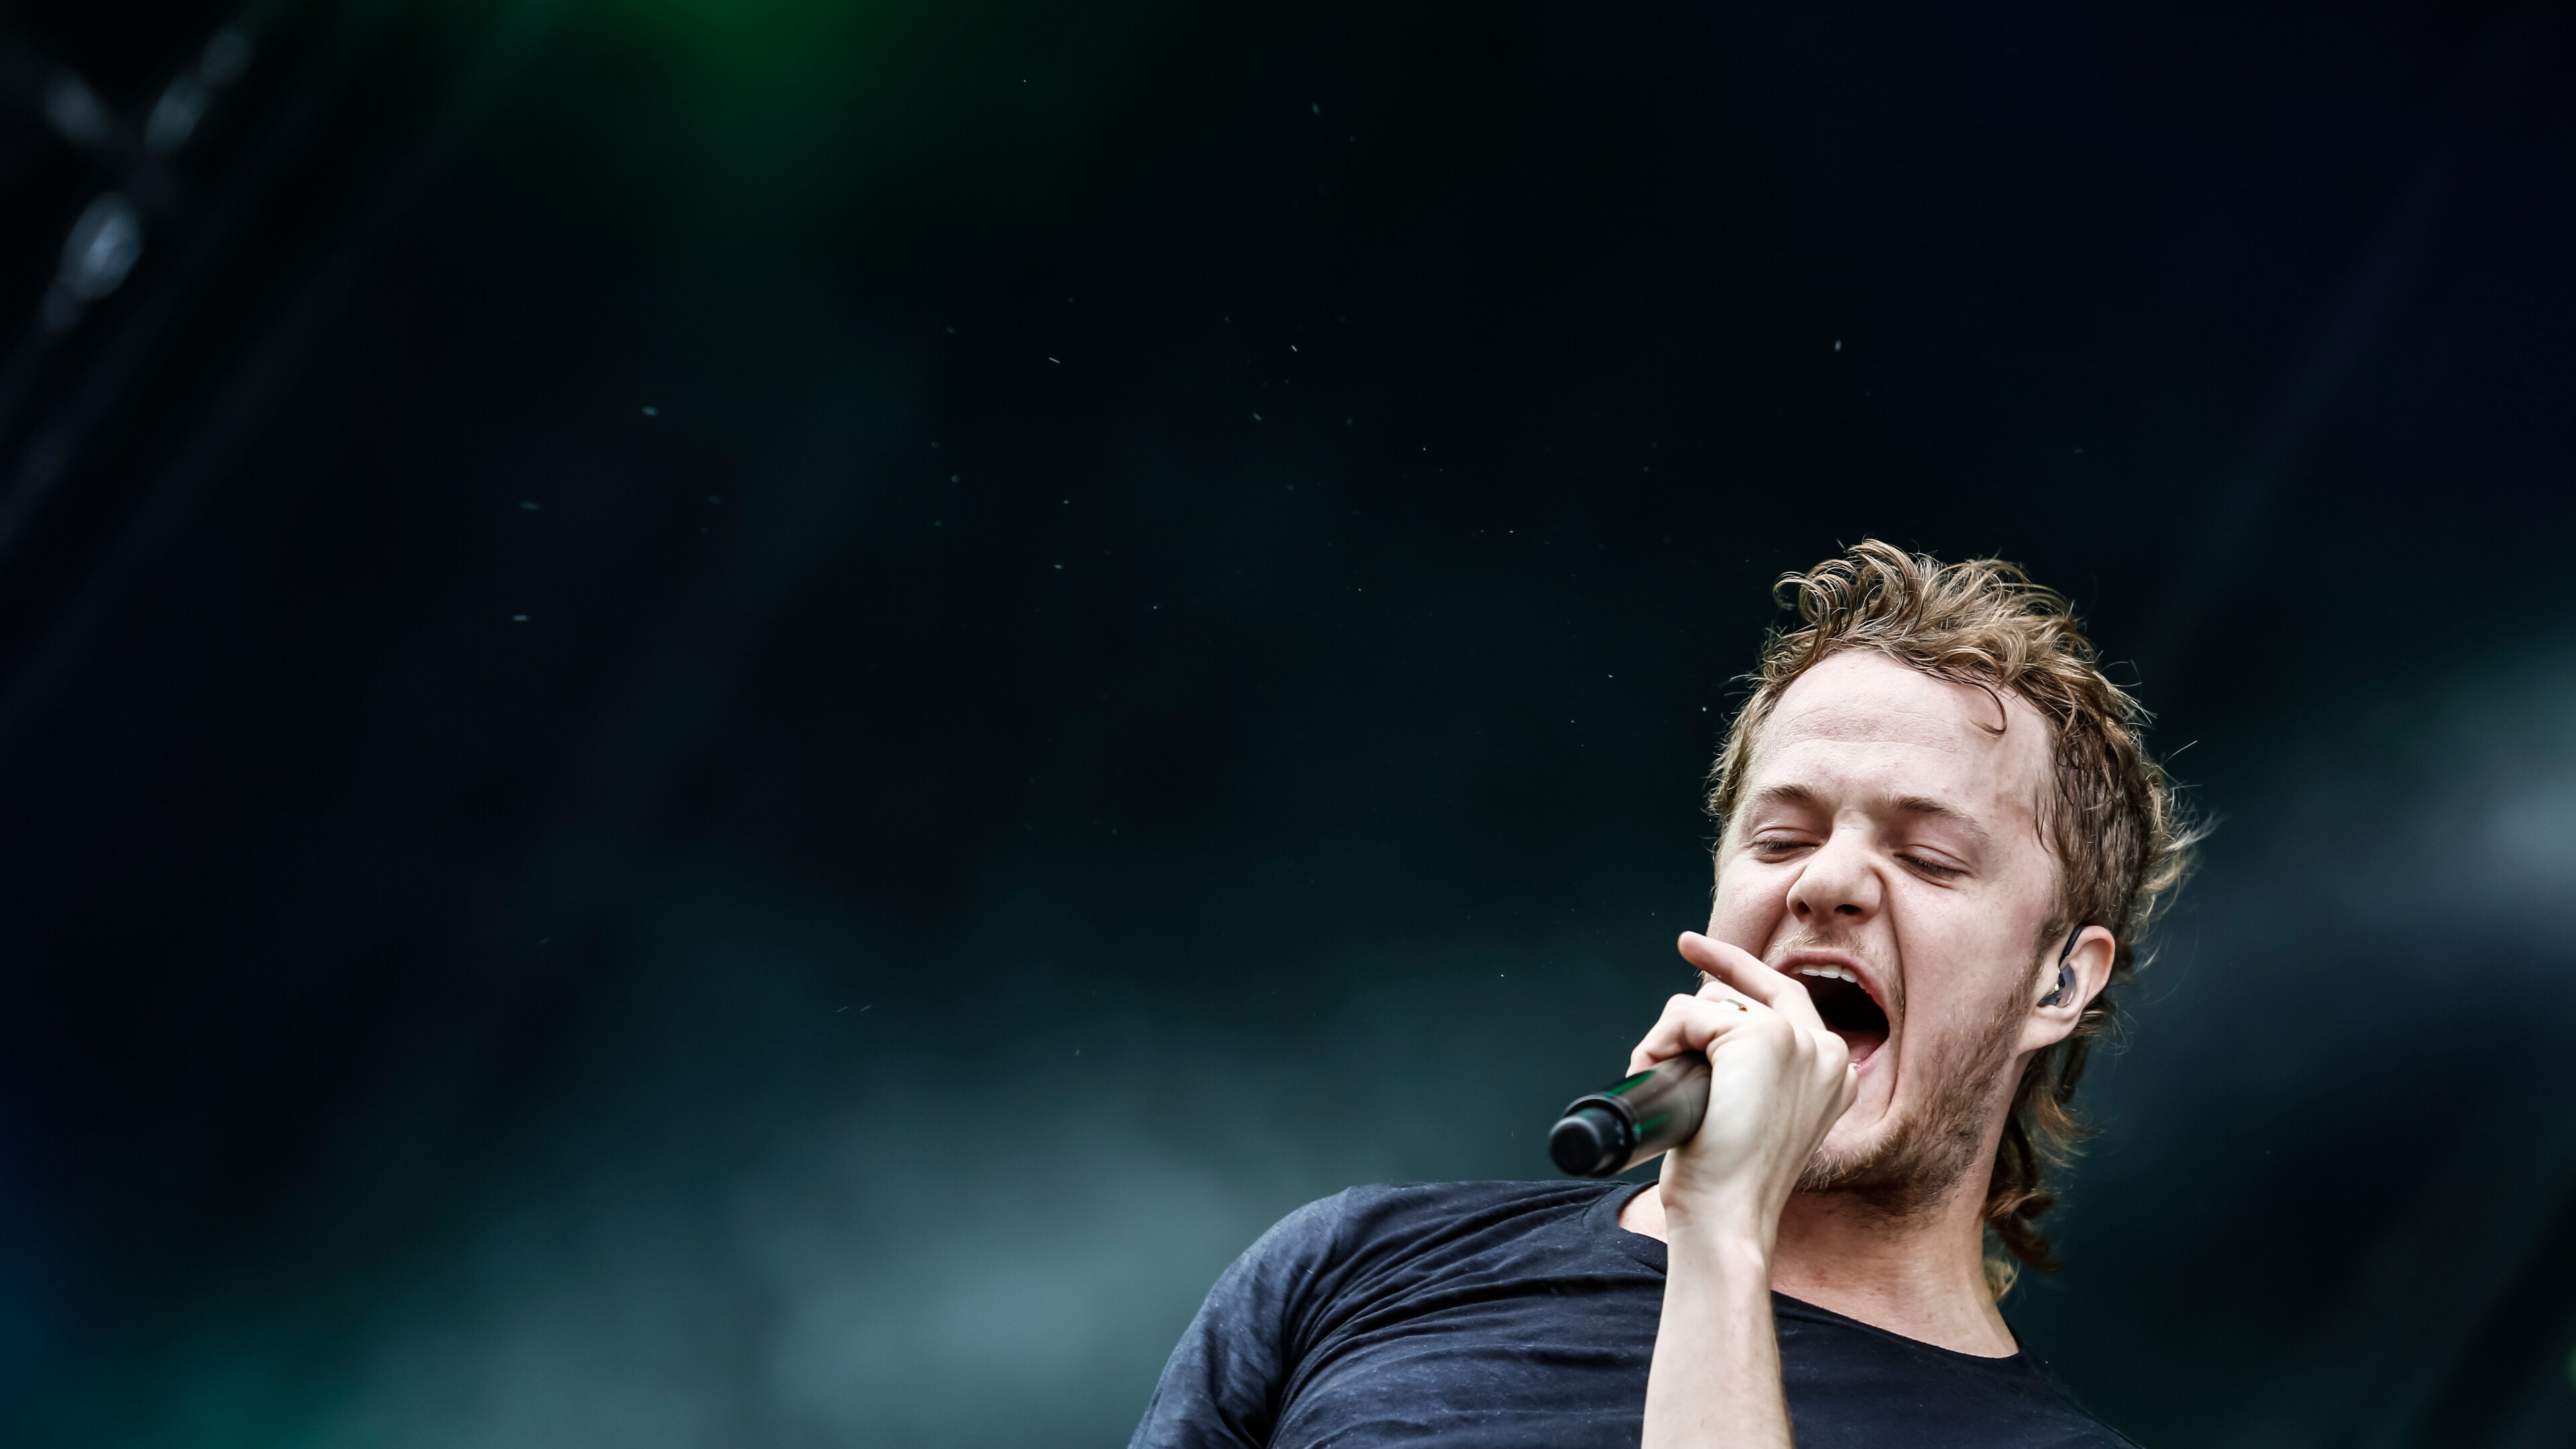 Imagine Dragons: Dan Reynolds, "It's Time", the debut single, was released on February 6, 2012. 3840x2160 4K Background.